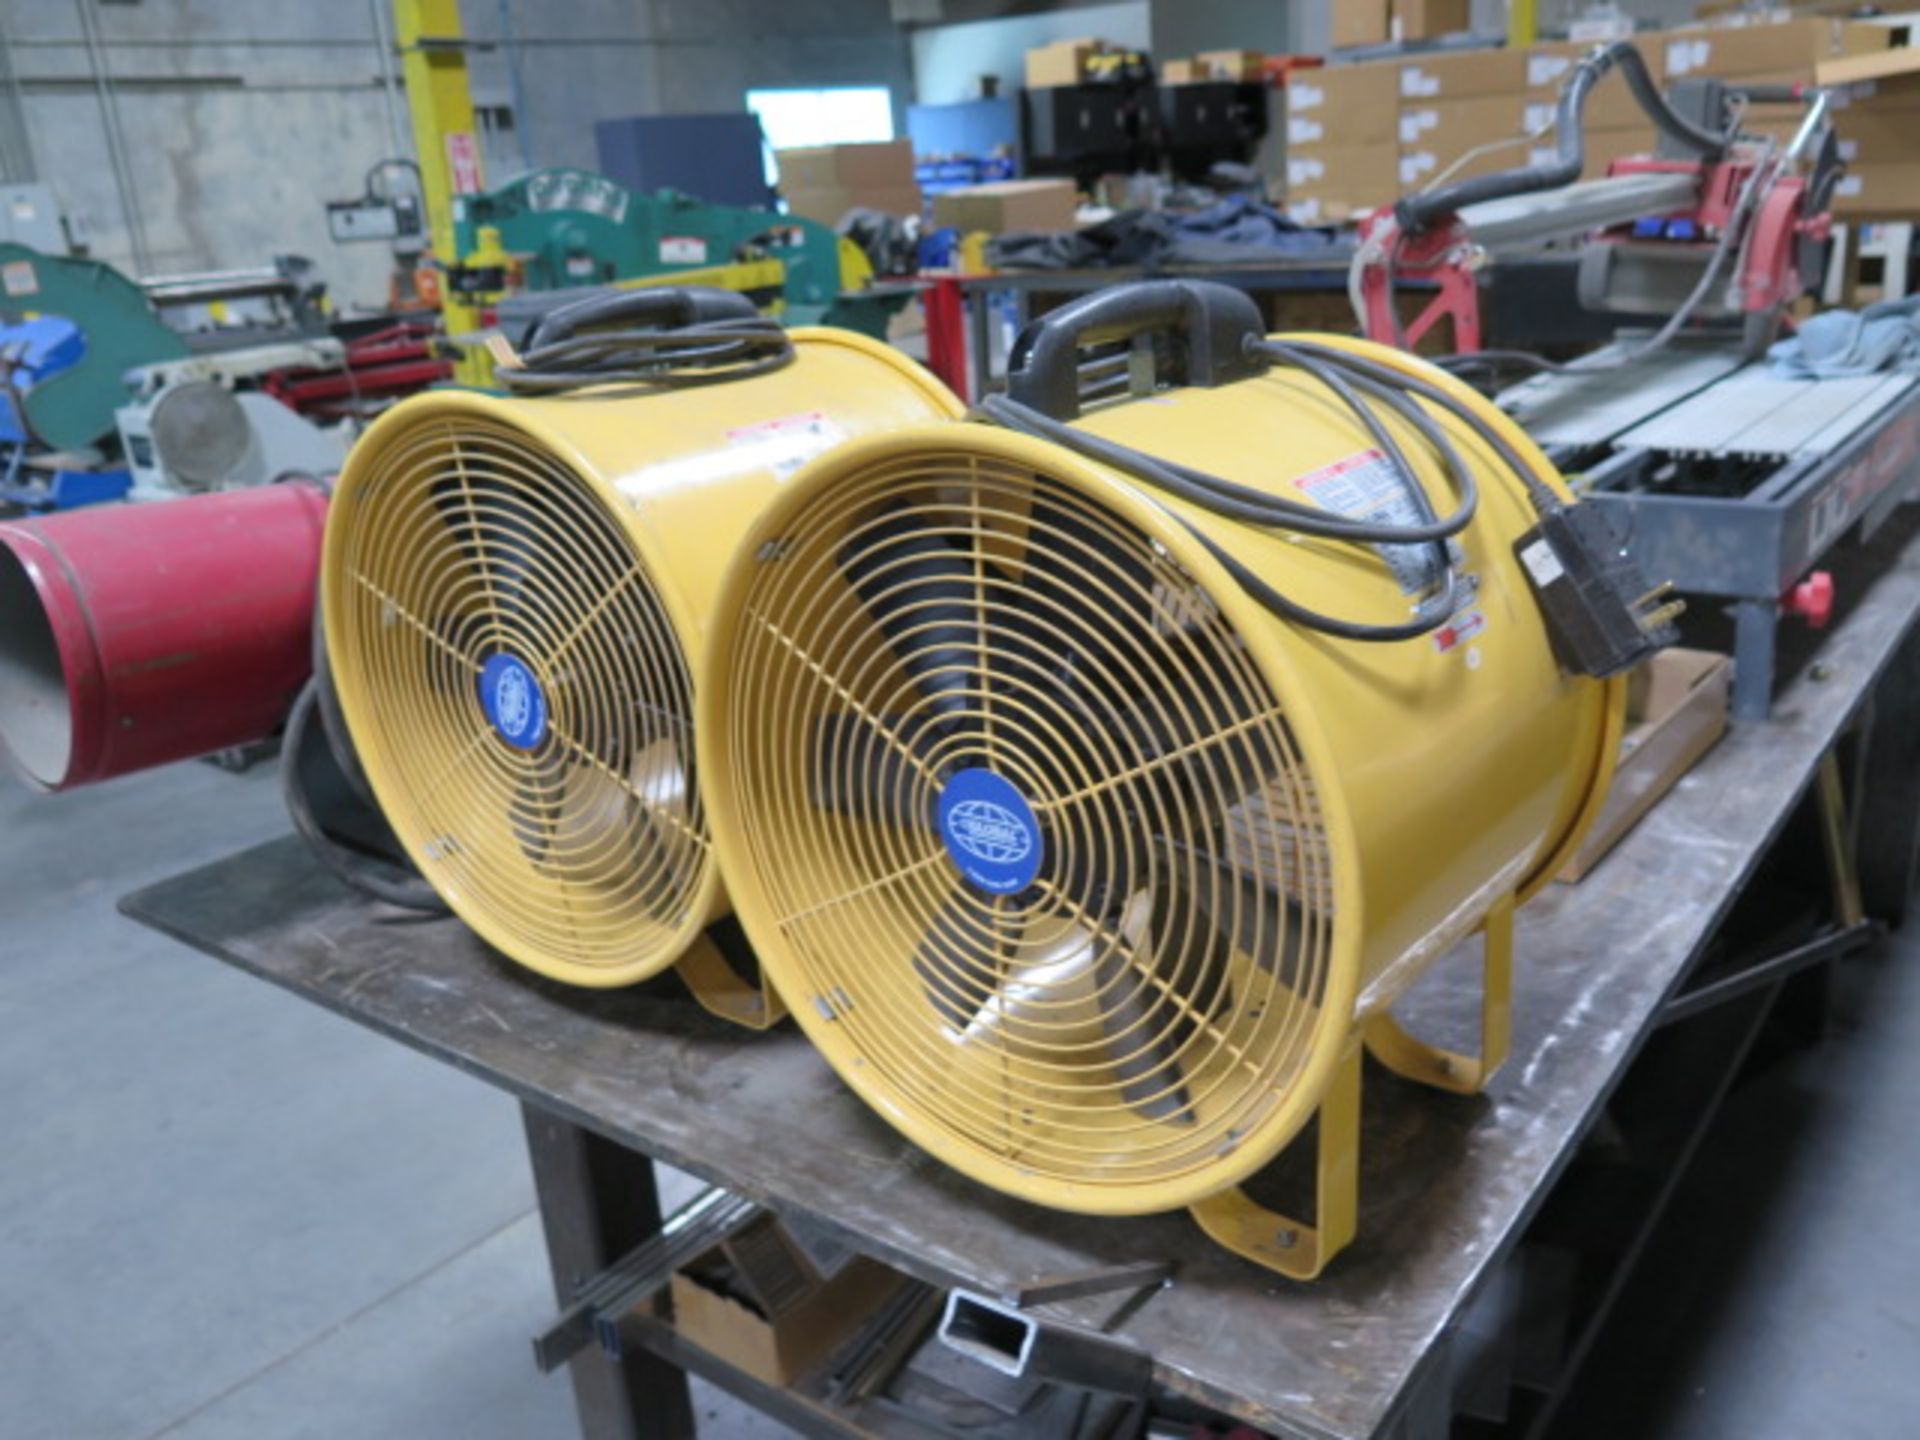 Global Portable Ventilation Fans (2) and Propane Heater (SOLD AS-IS - NO WARRANTY) - Image 2 of 7